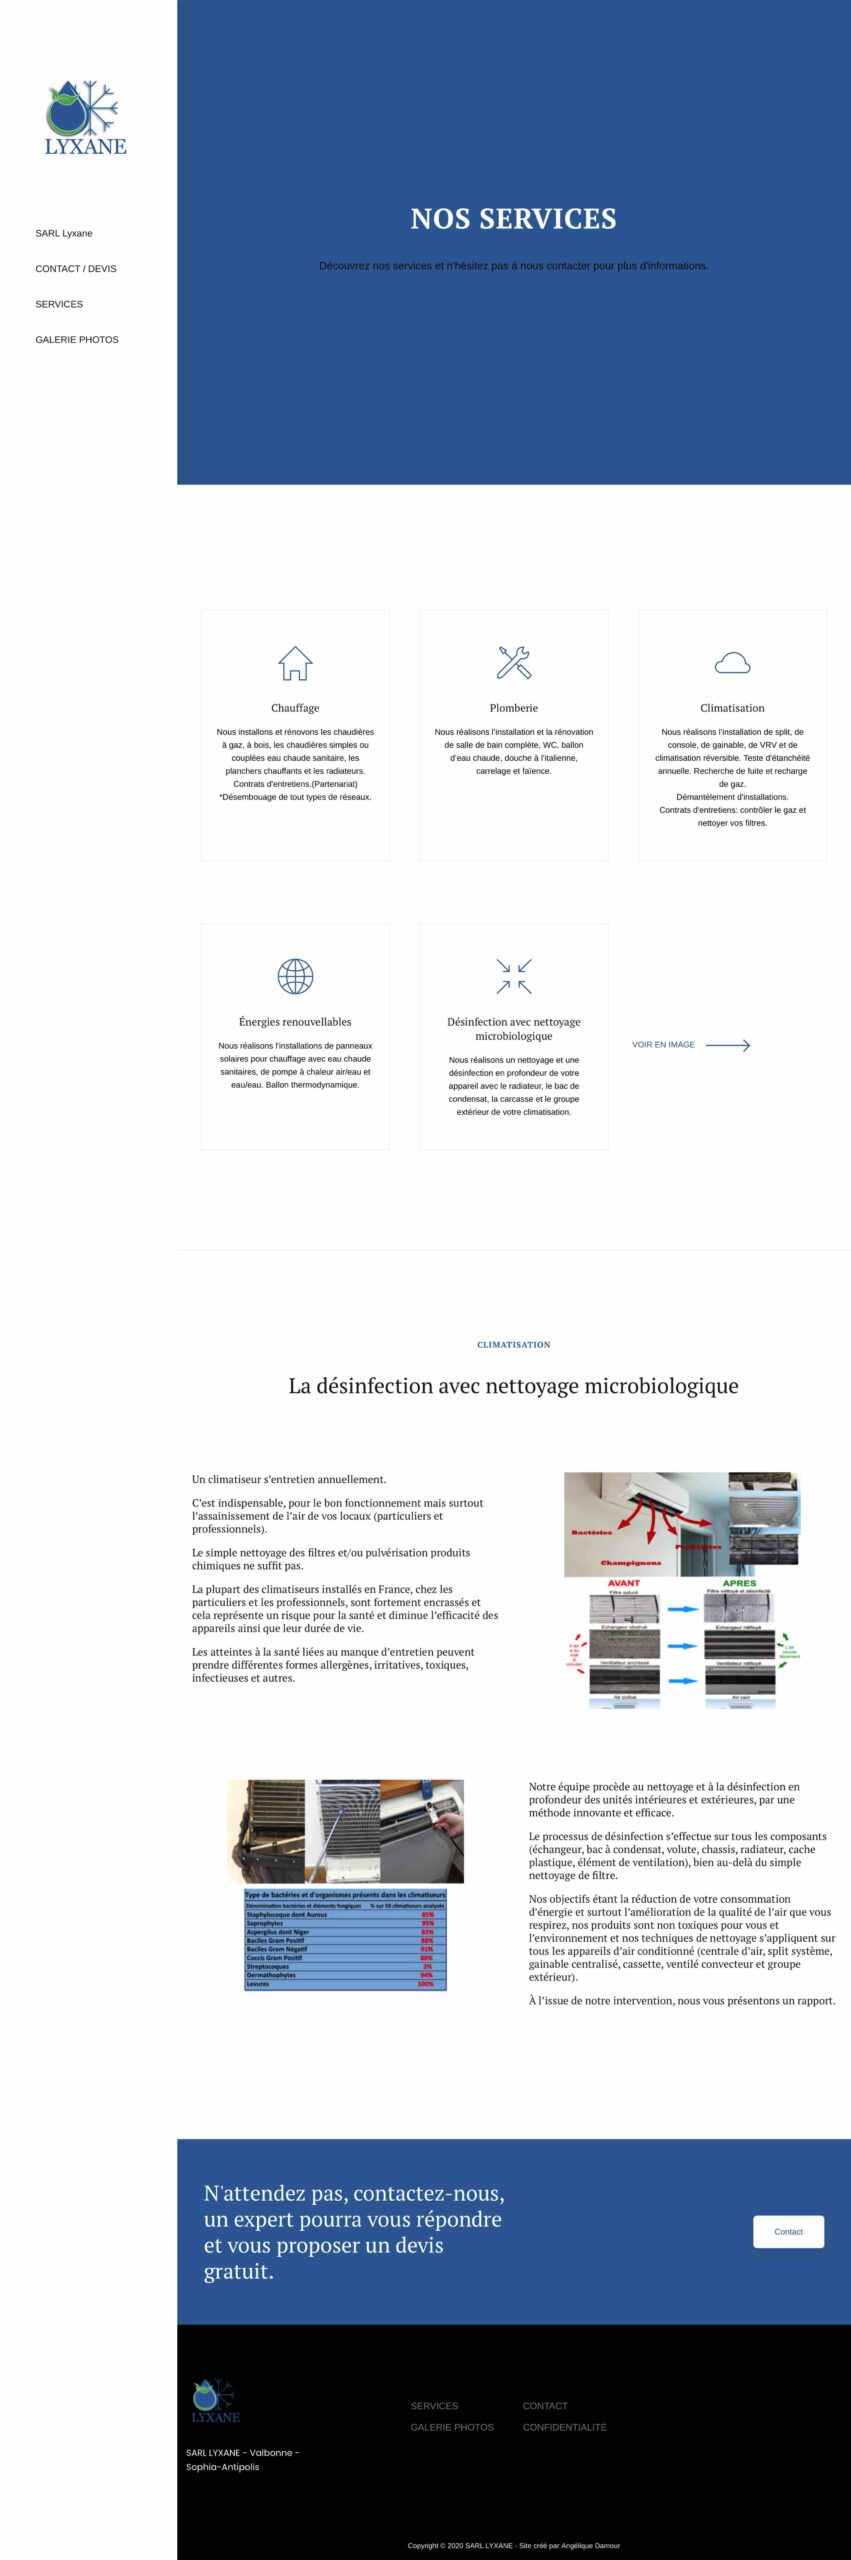 ANGELIQUE DAMOUR - projet LYXANE - page services full